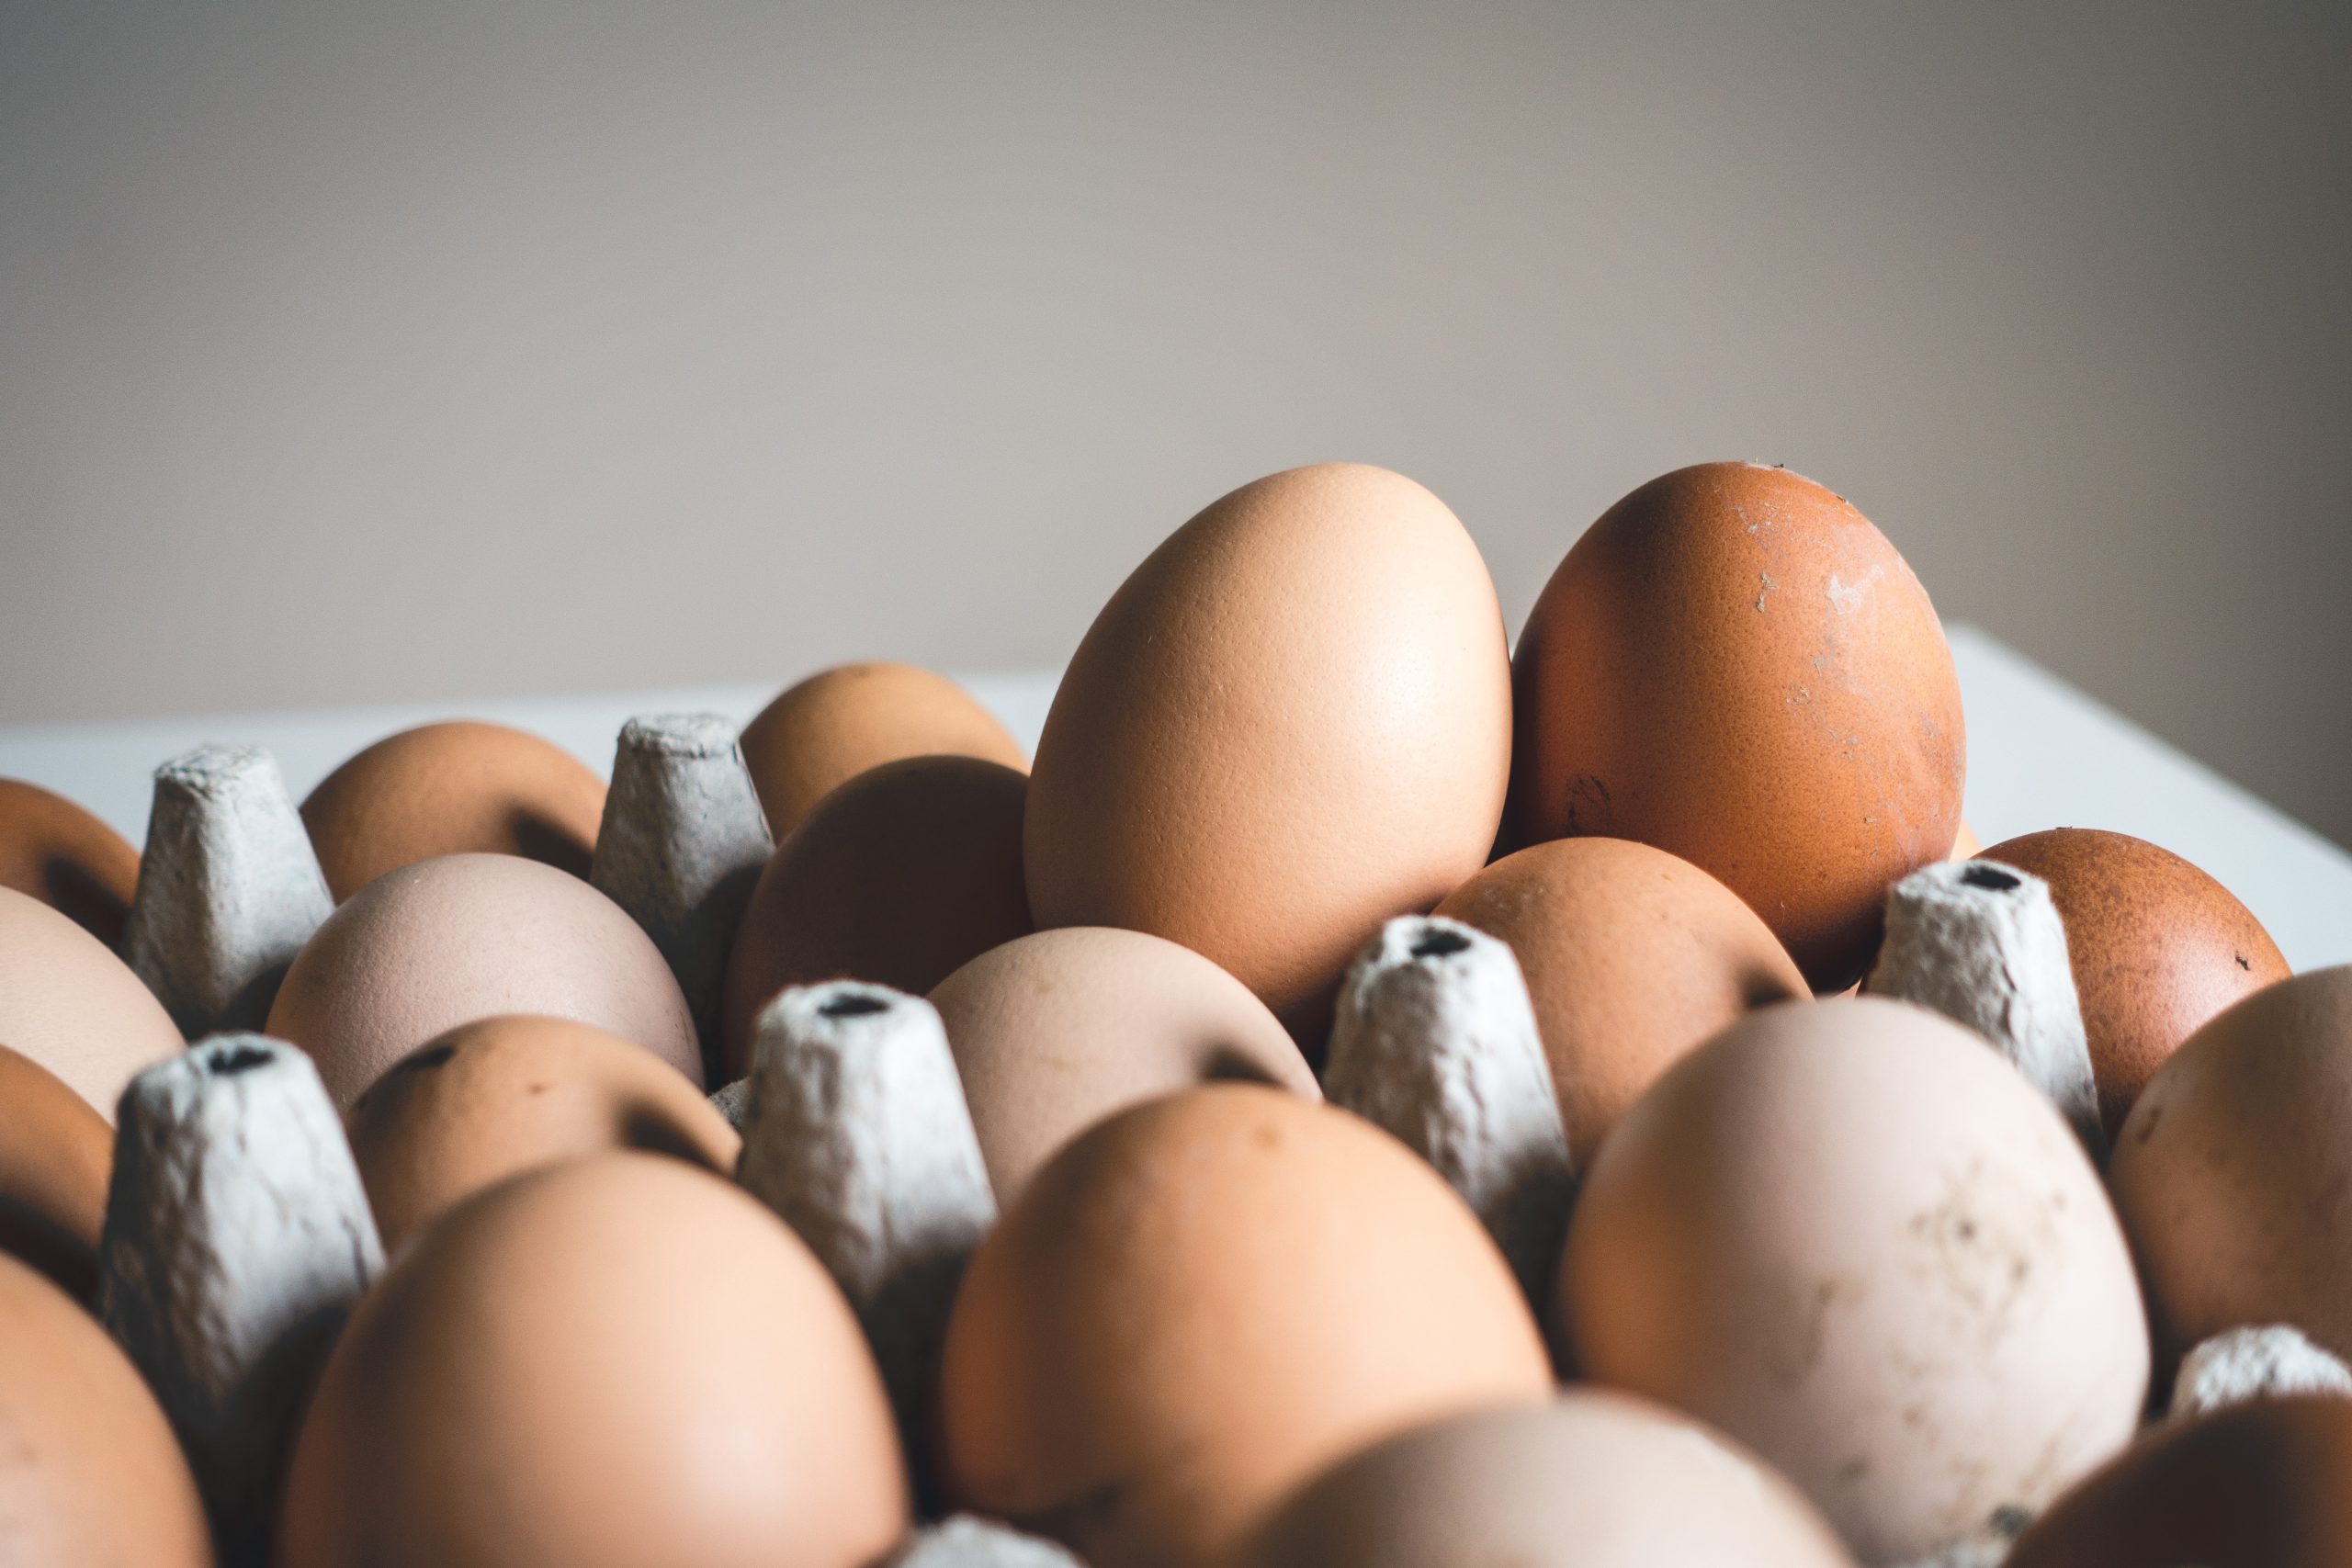 Are boiled eggs good for you?